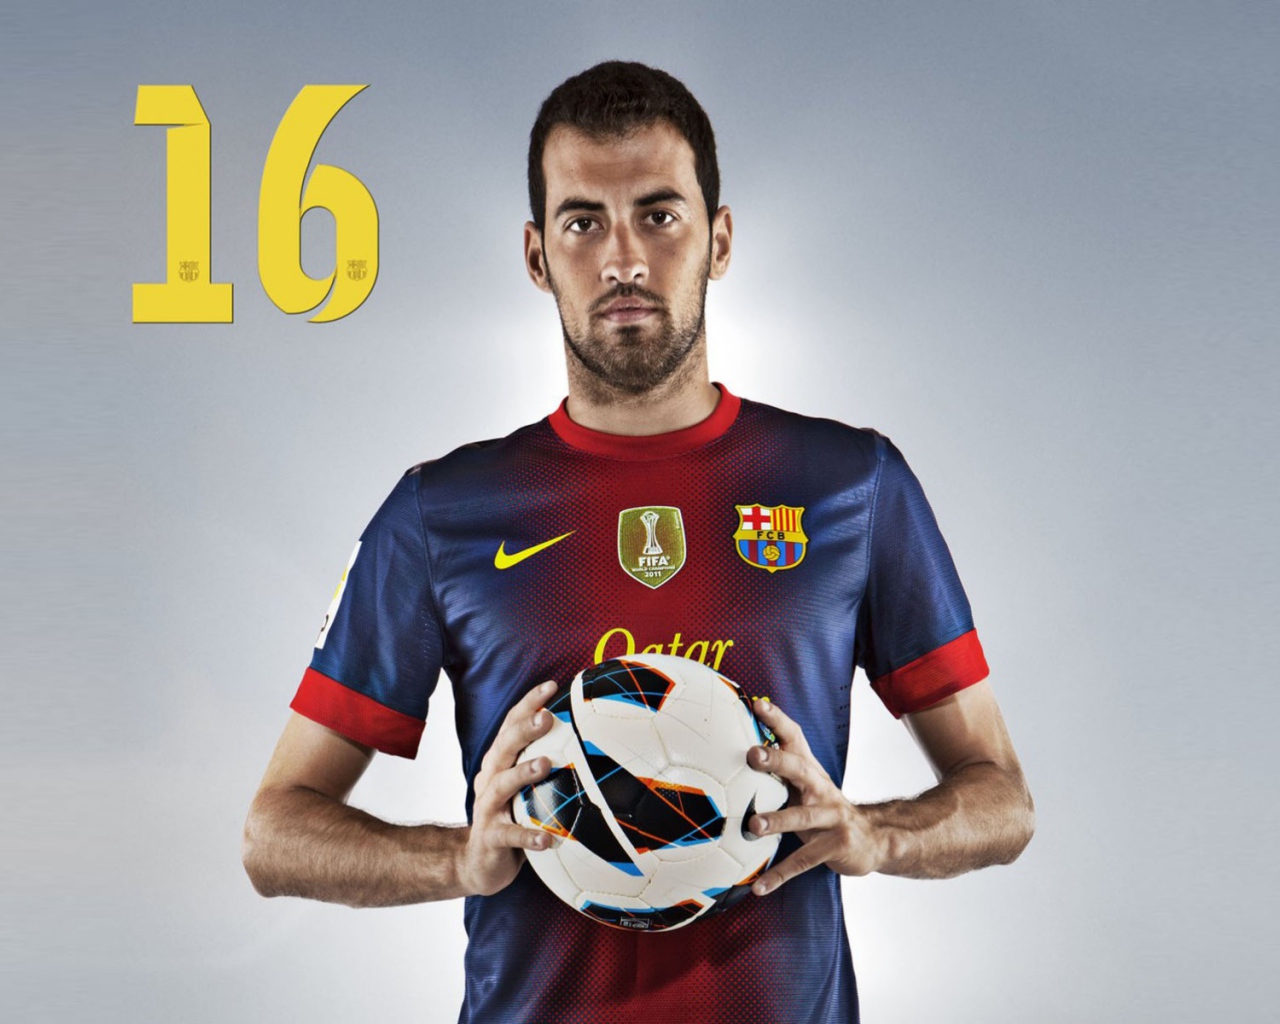 The best player of Barcelona Sergio Busquets